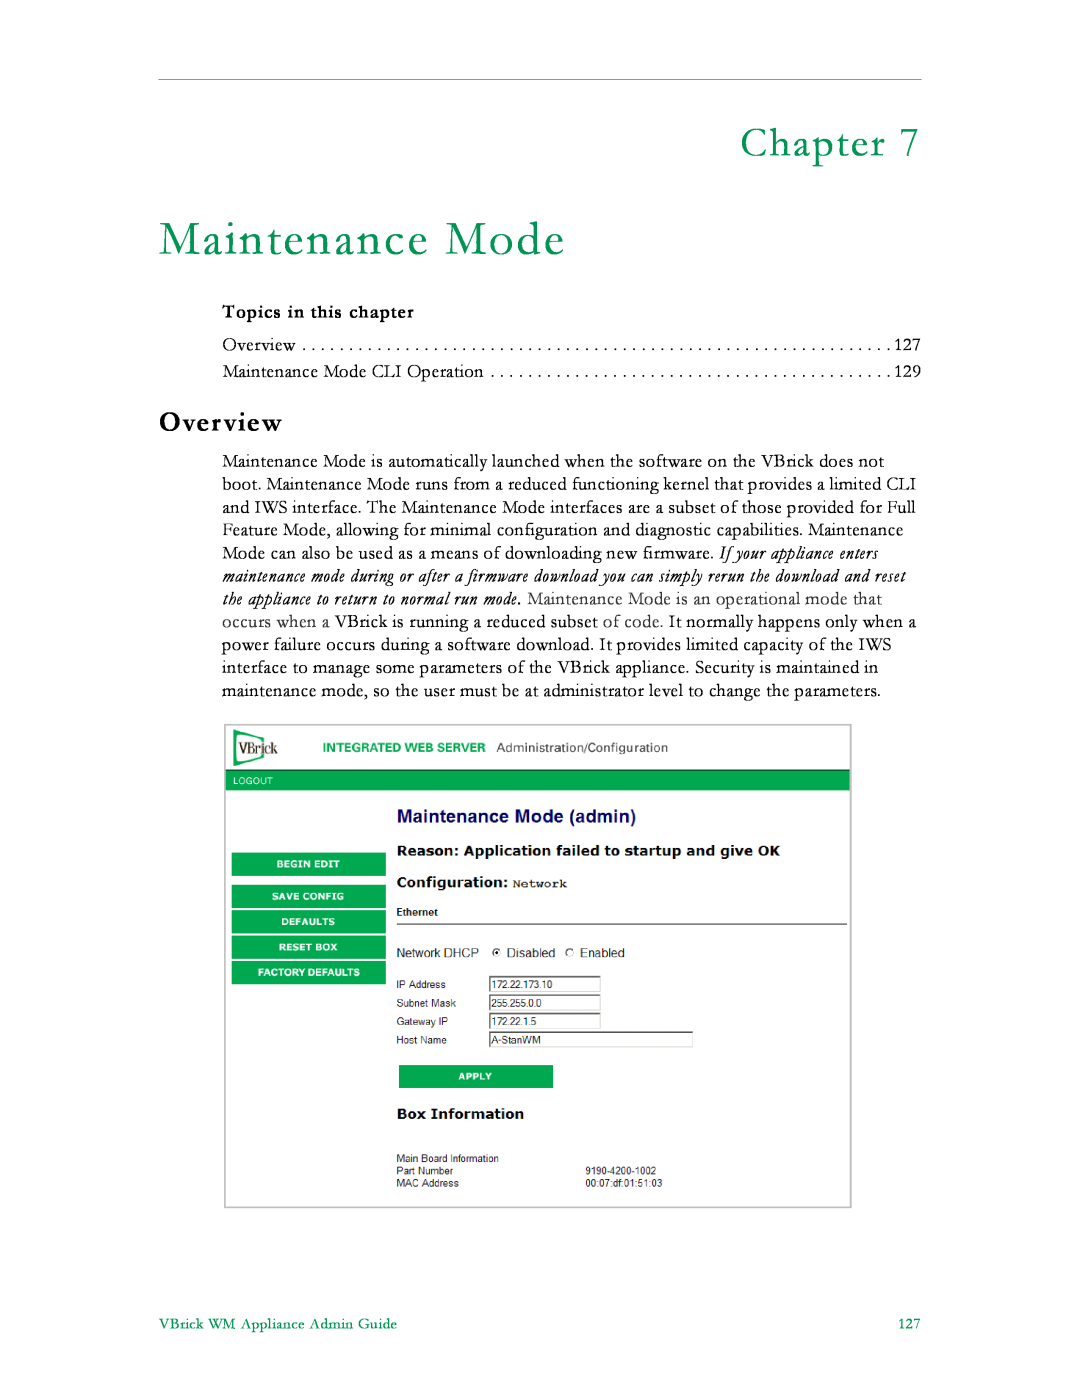 VBrick Systems VB5000, VB6000, VB4000 manual Maintenance Mode, Chapter, Overview, Topics in this chapter 